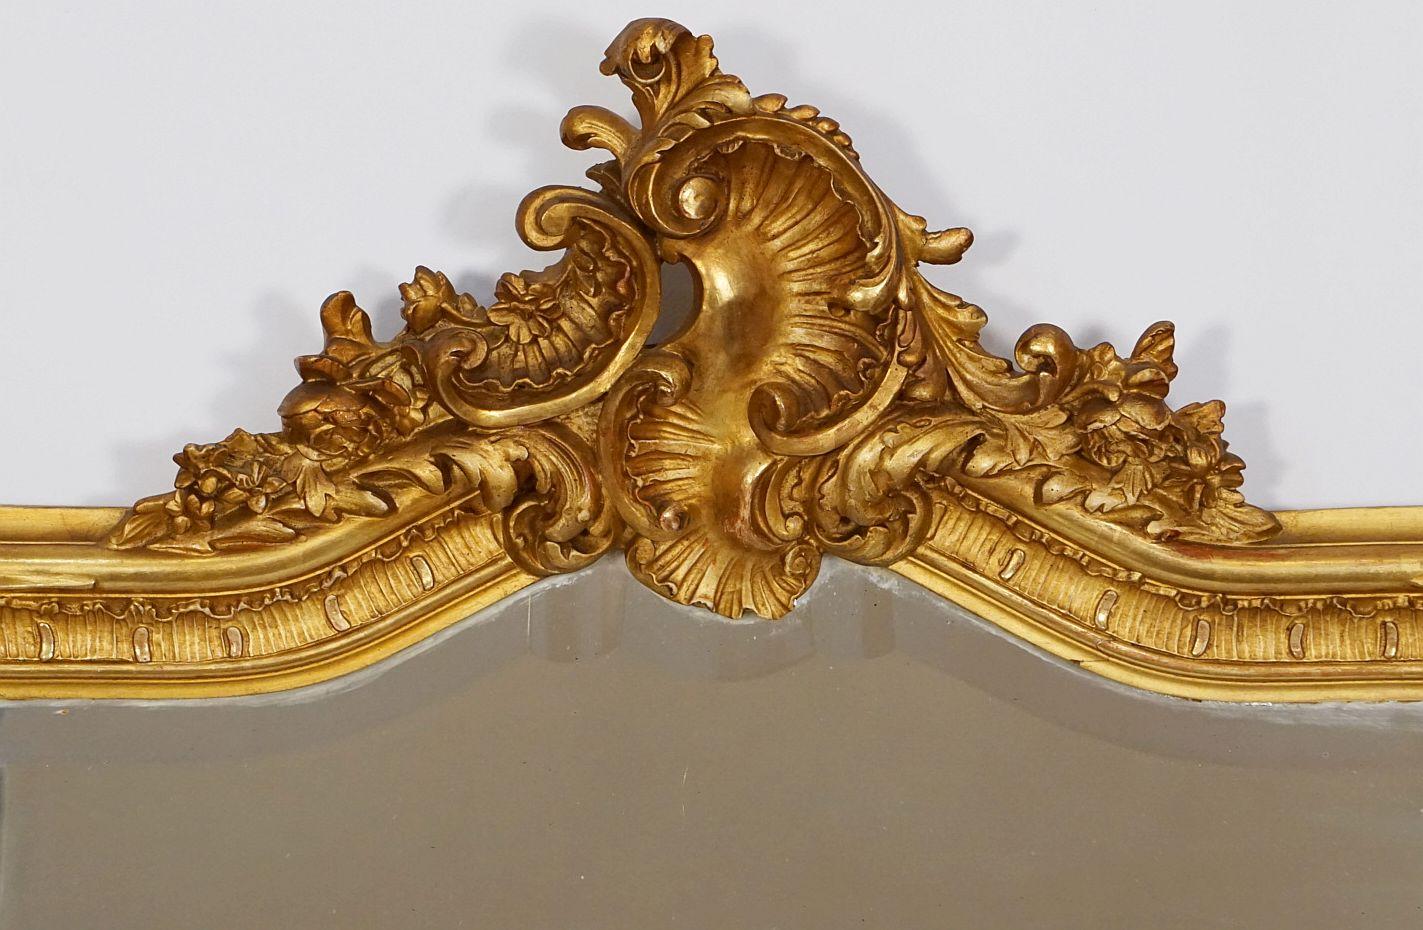 A fine large French giltwood pier or wall mirror from the 19th century, featuring an arched top with Rococo cartouche and foliate flourishes, showing decorative rosettes and scrollwork around the frame and to the base.